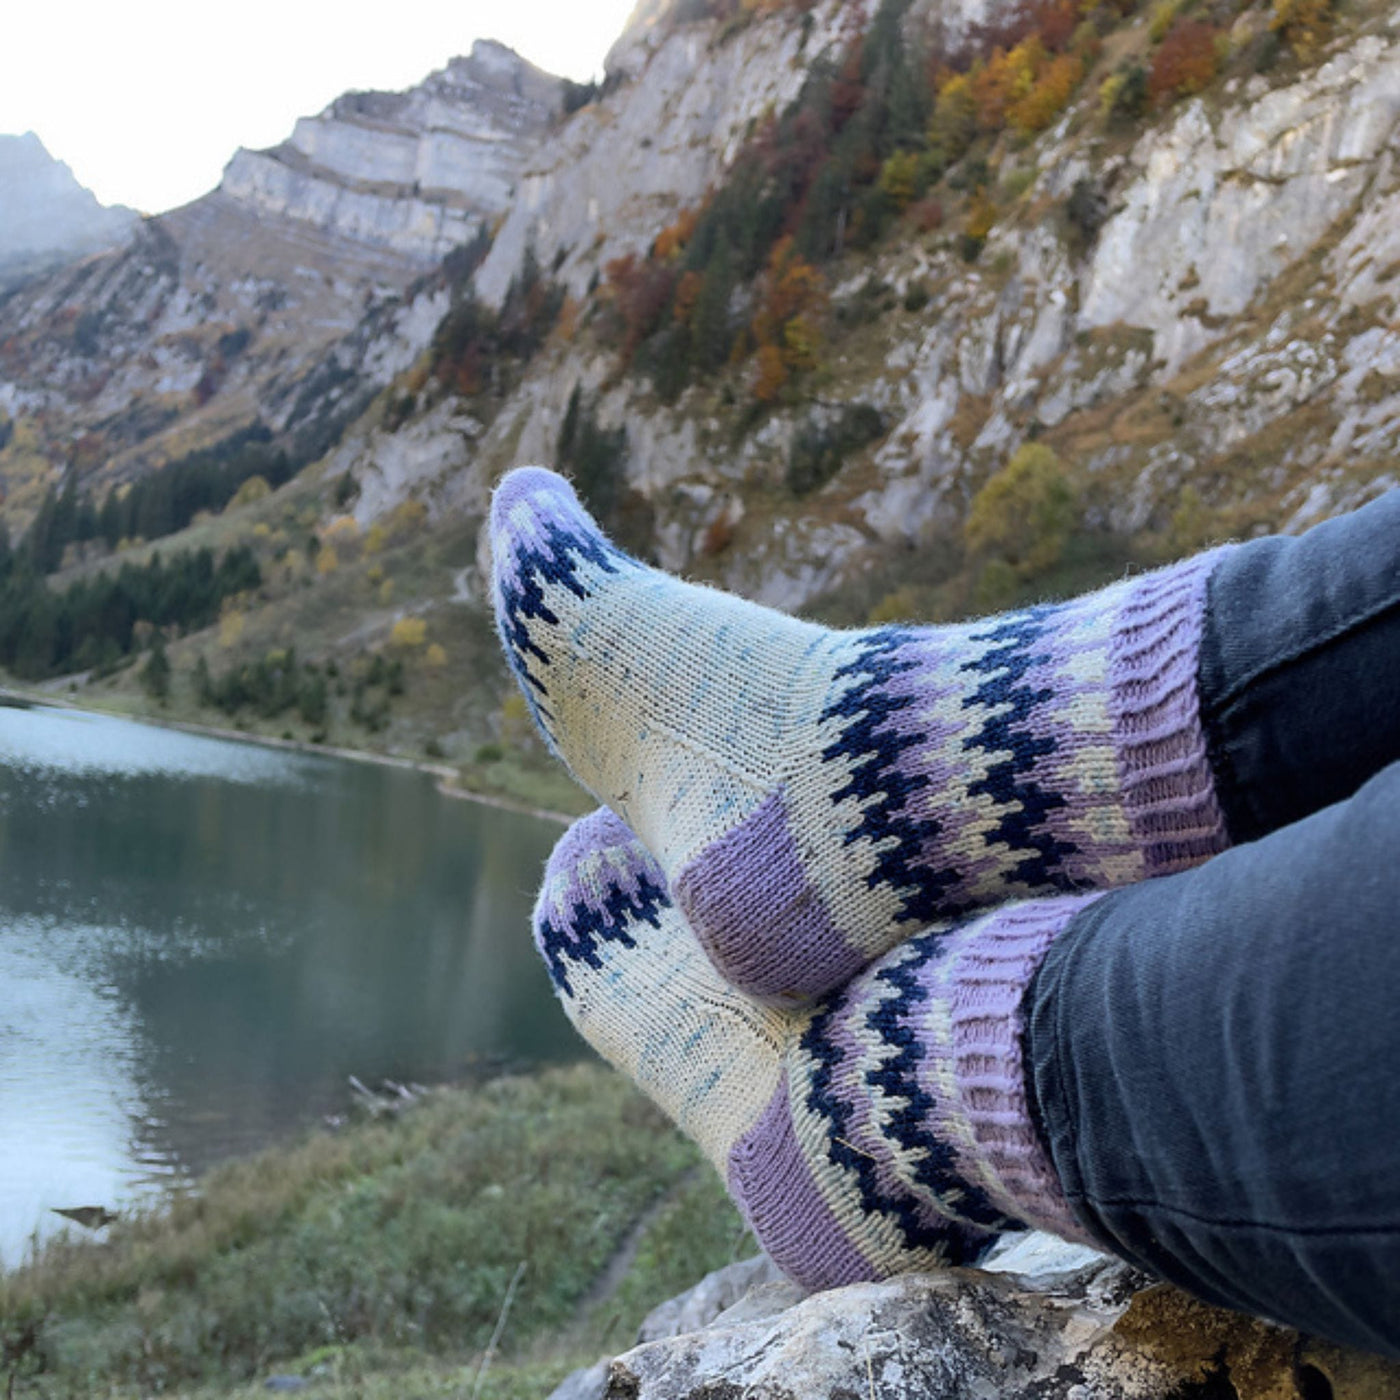 Two feet with crossed ankles near a mountain lake wearing white socks with lavender and navy colorwork